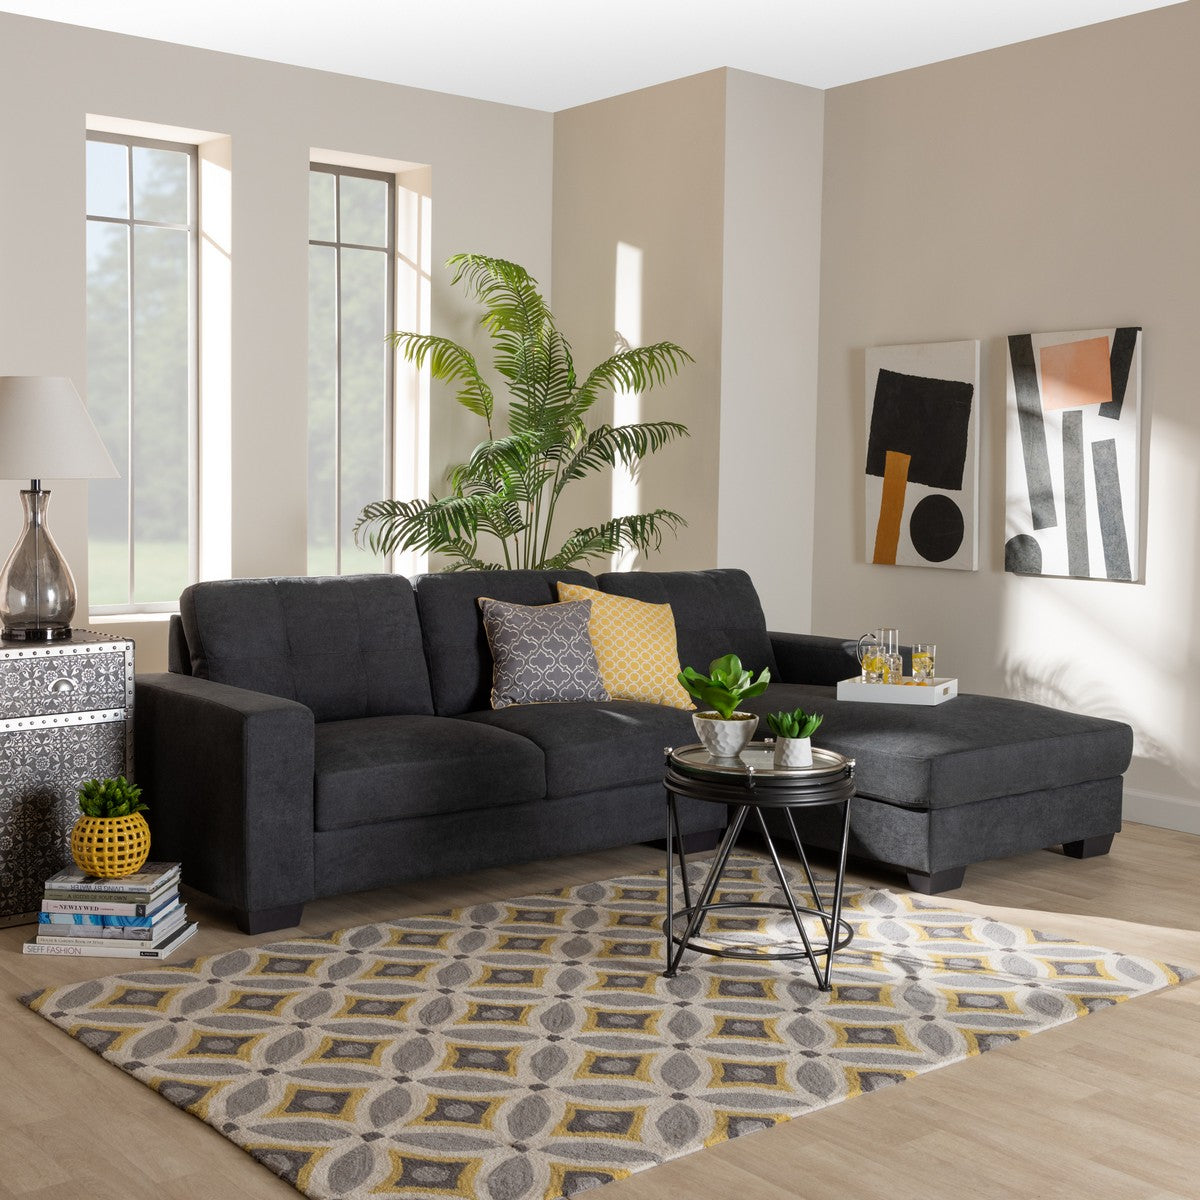 Baxton Studio Langley Modern and Contemporary Dark Grey Fabric Upholstered Sectional Sofa with Right Facing Chaise